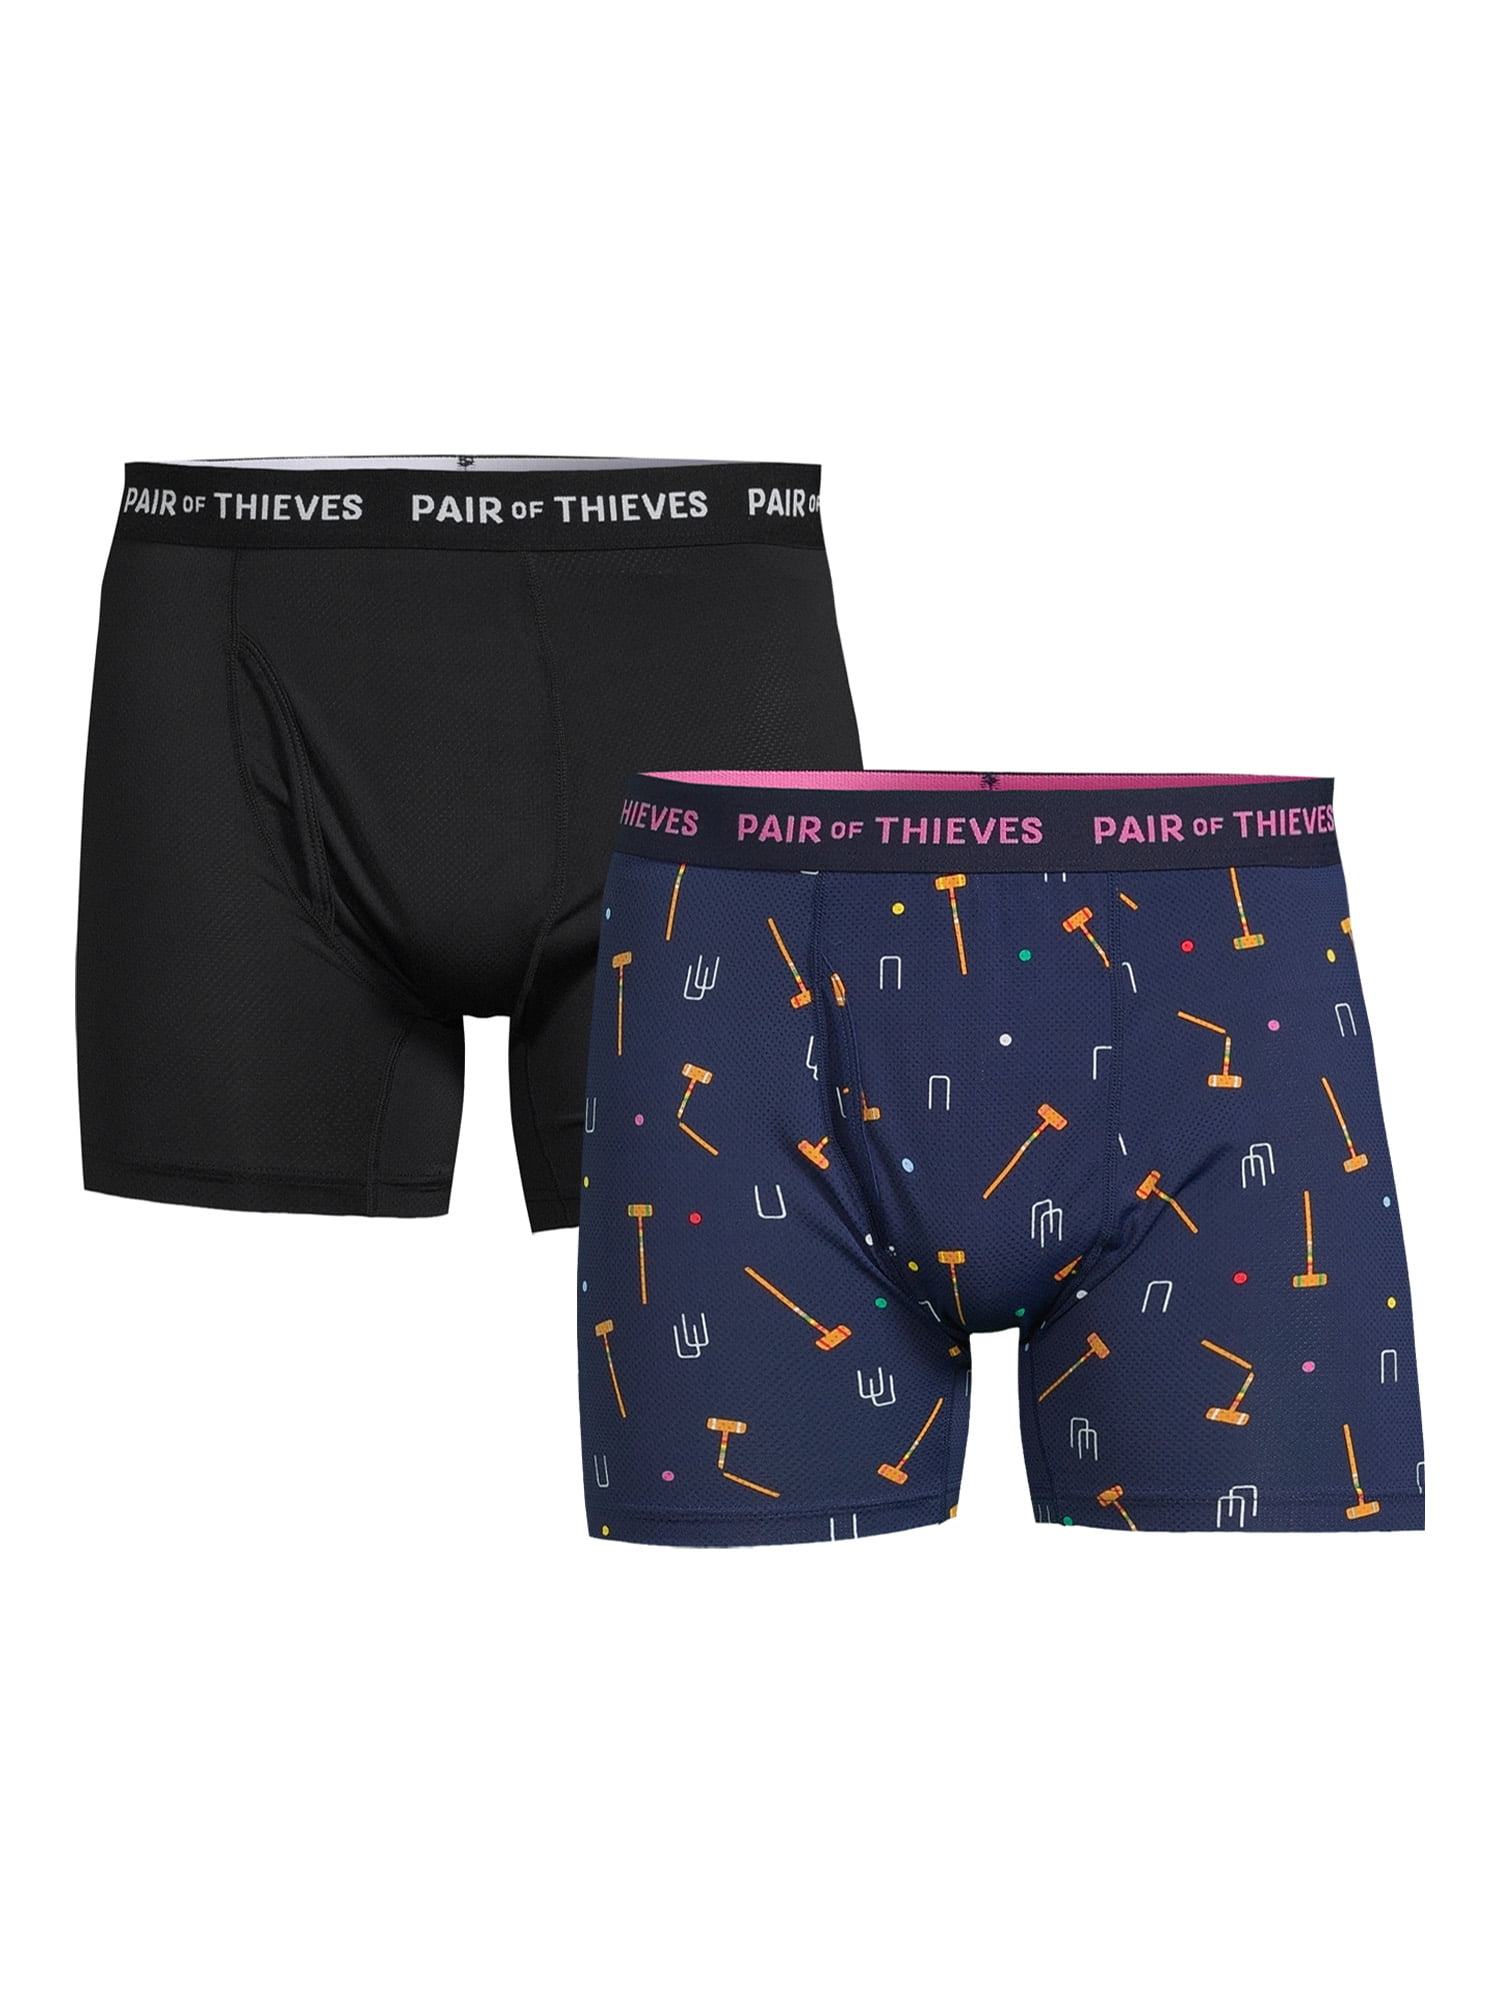 Pair of Thieves: Collection for Men